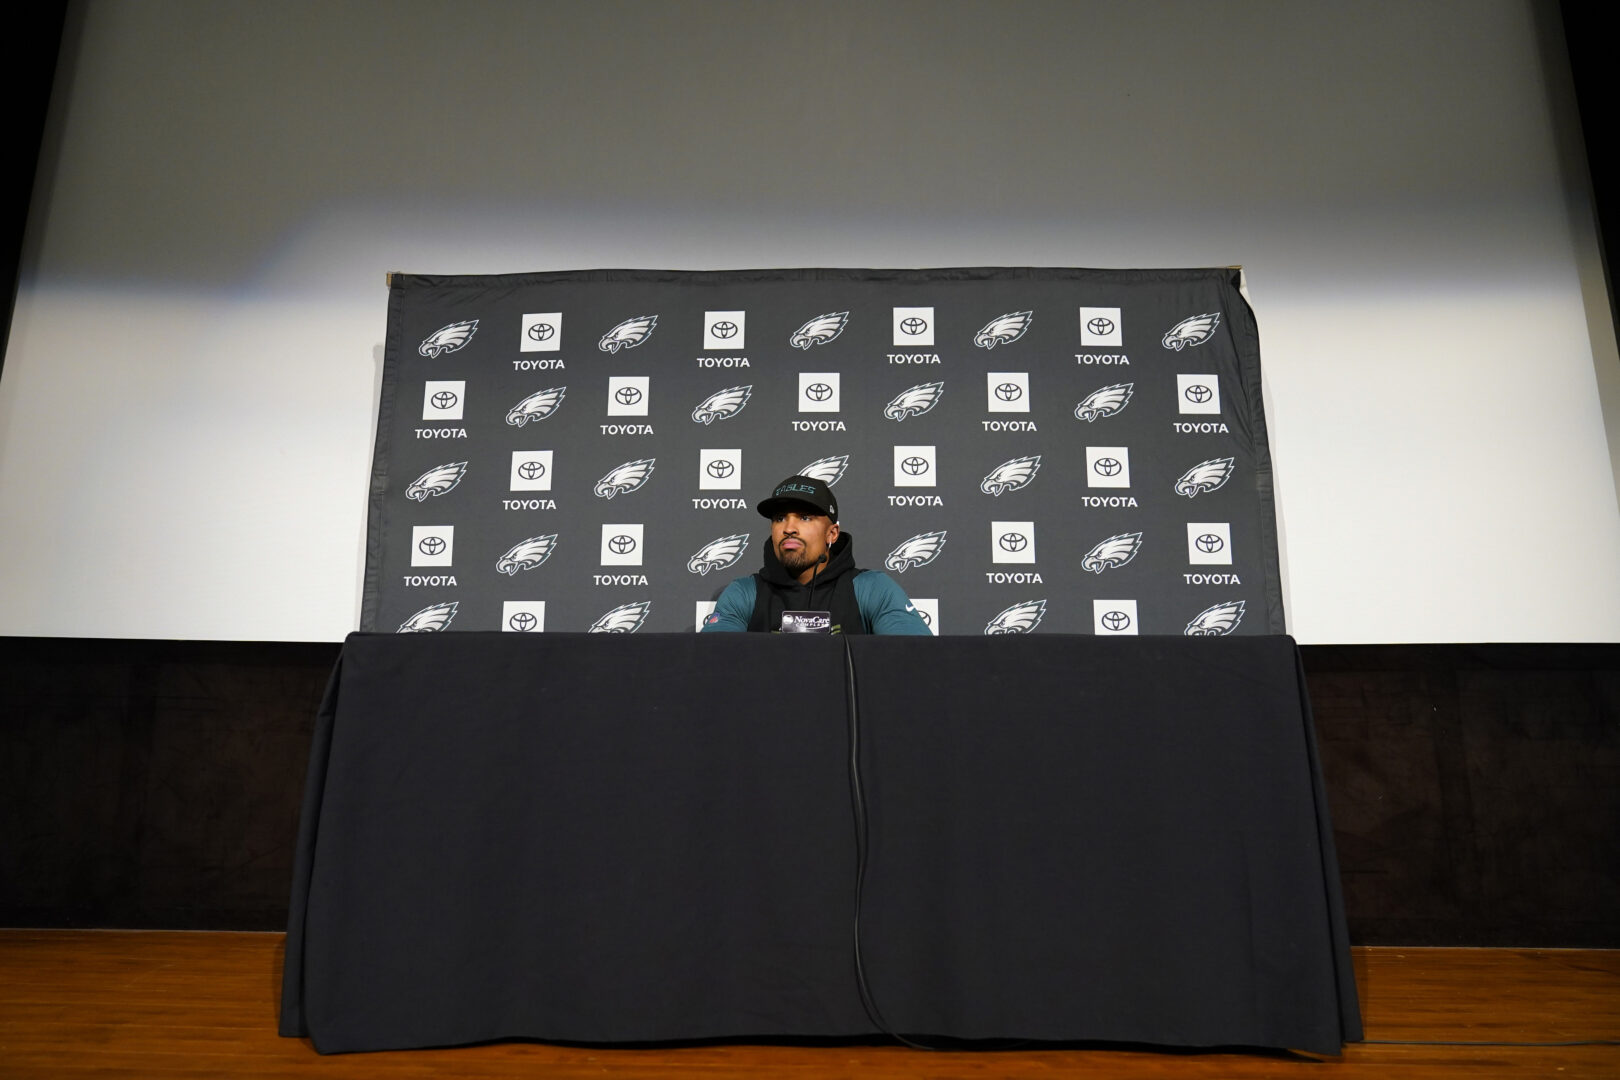 Philadelphia Eagles' Jalen Hurts listens to a question during a news conference at the NFL football team's training facility, Thursday, Feb. 2, 2023, in Philadelphia. The Eagles are scheduled to play the Kansas City Chiefs in Super Bowl LVII on Sunday, Feb. 12, 2023.